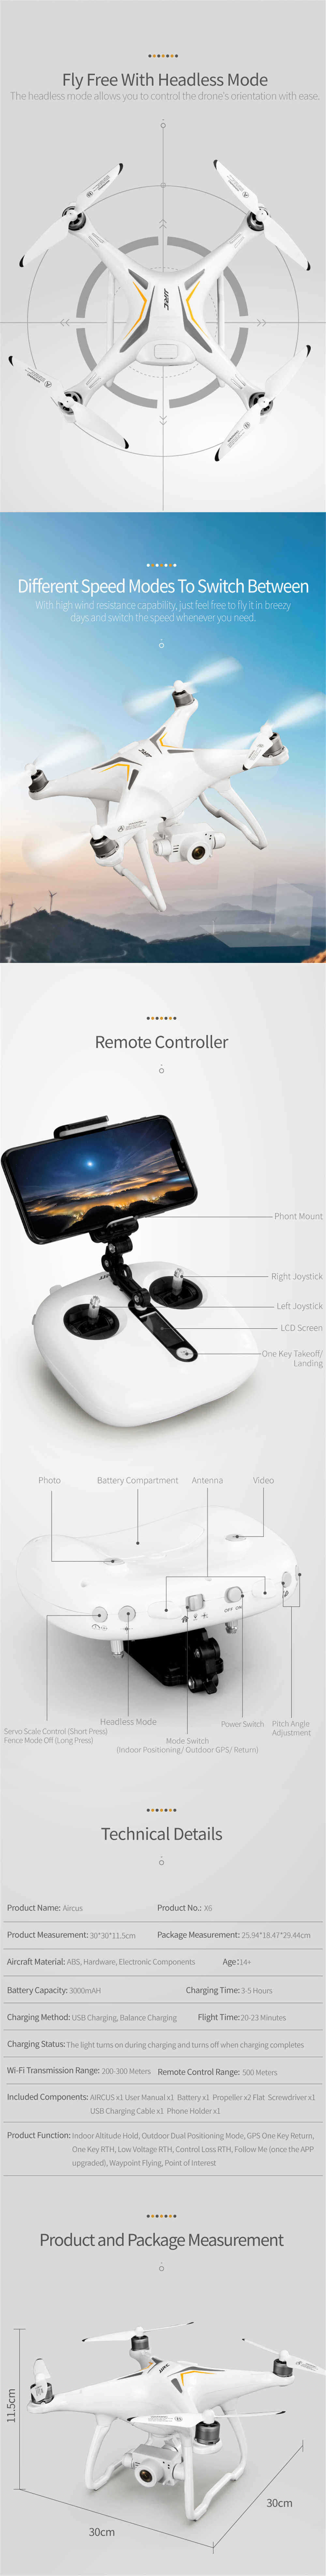 JJRC-X6-Aircus-5G-WIFI-FPV-Double-GPS-With-1080P-Wide-Angle-Camera-Two-Axis-Self-Stabilizing-Gimbal--1472966